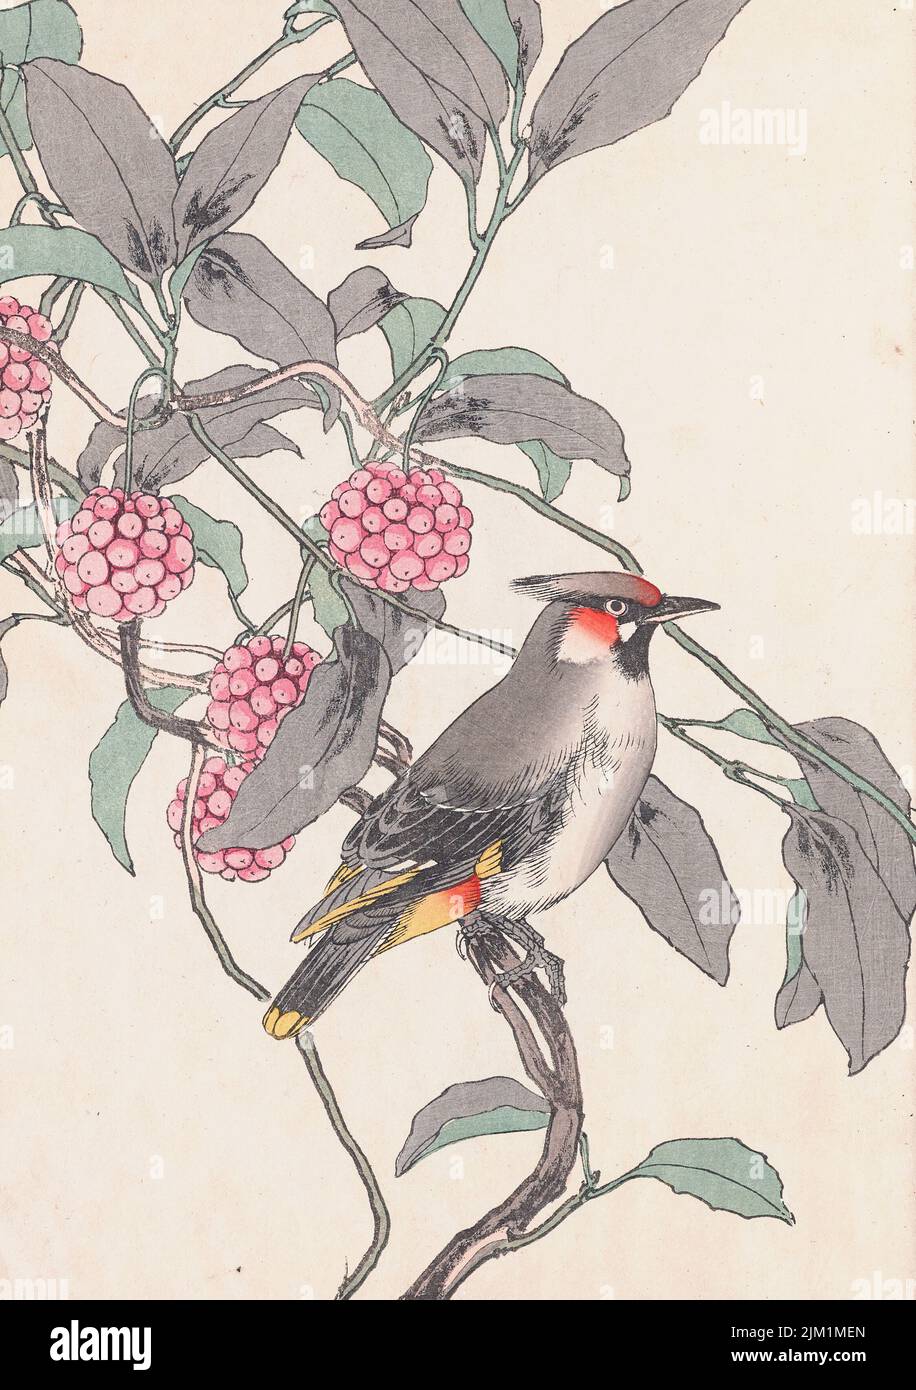 The Four Seasons Bird and Flower Albums (Keinen Kacho Gafu). Museum: PRIVATE COLLECTION. Author: IMAO KEINEN. Stock Photo